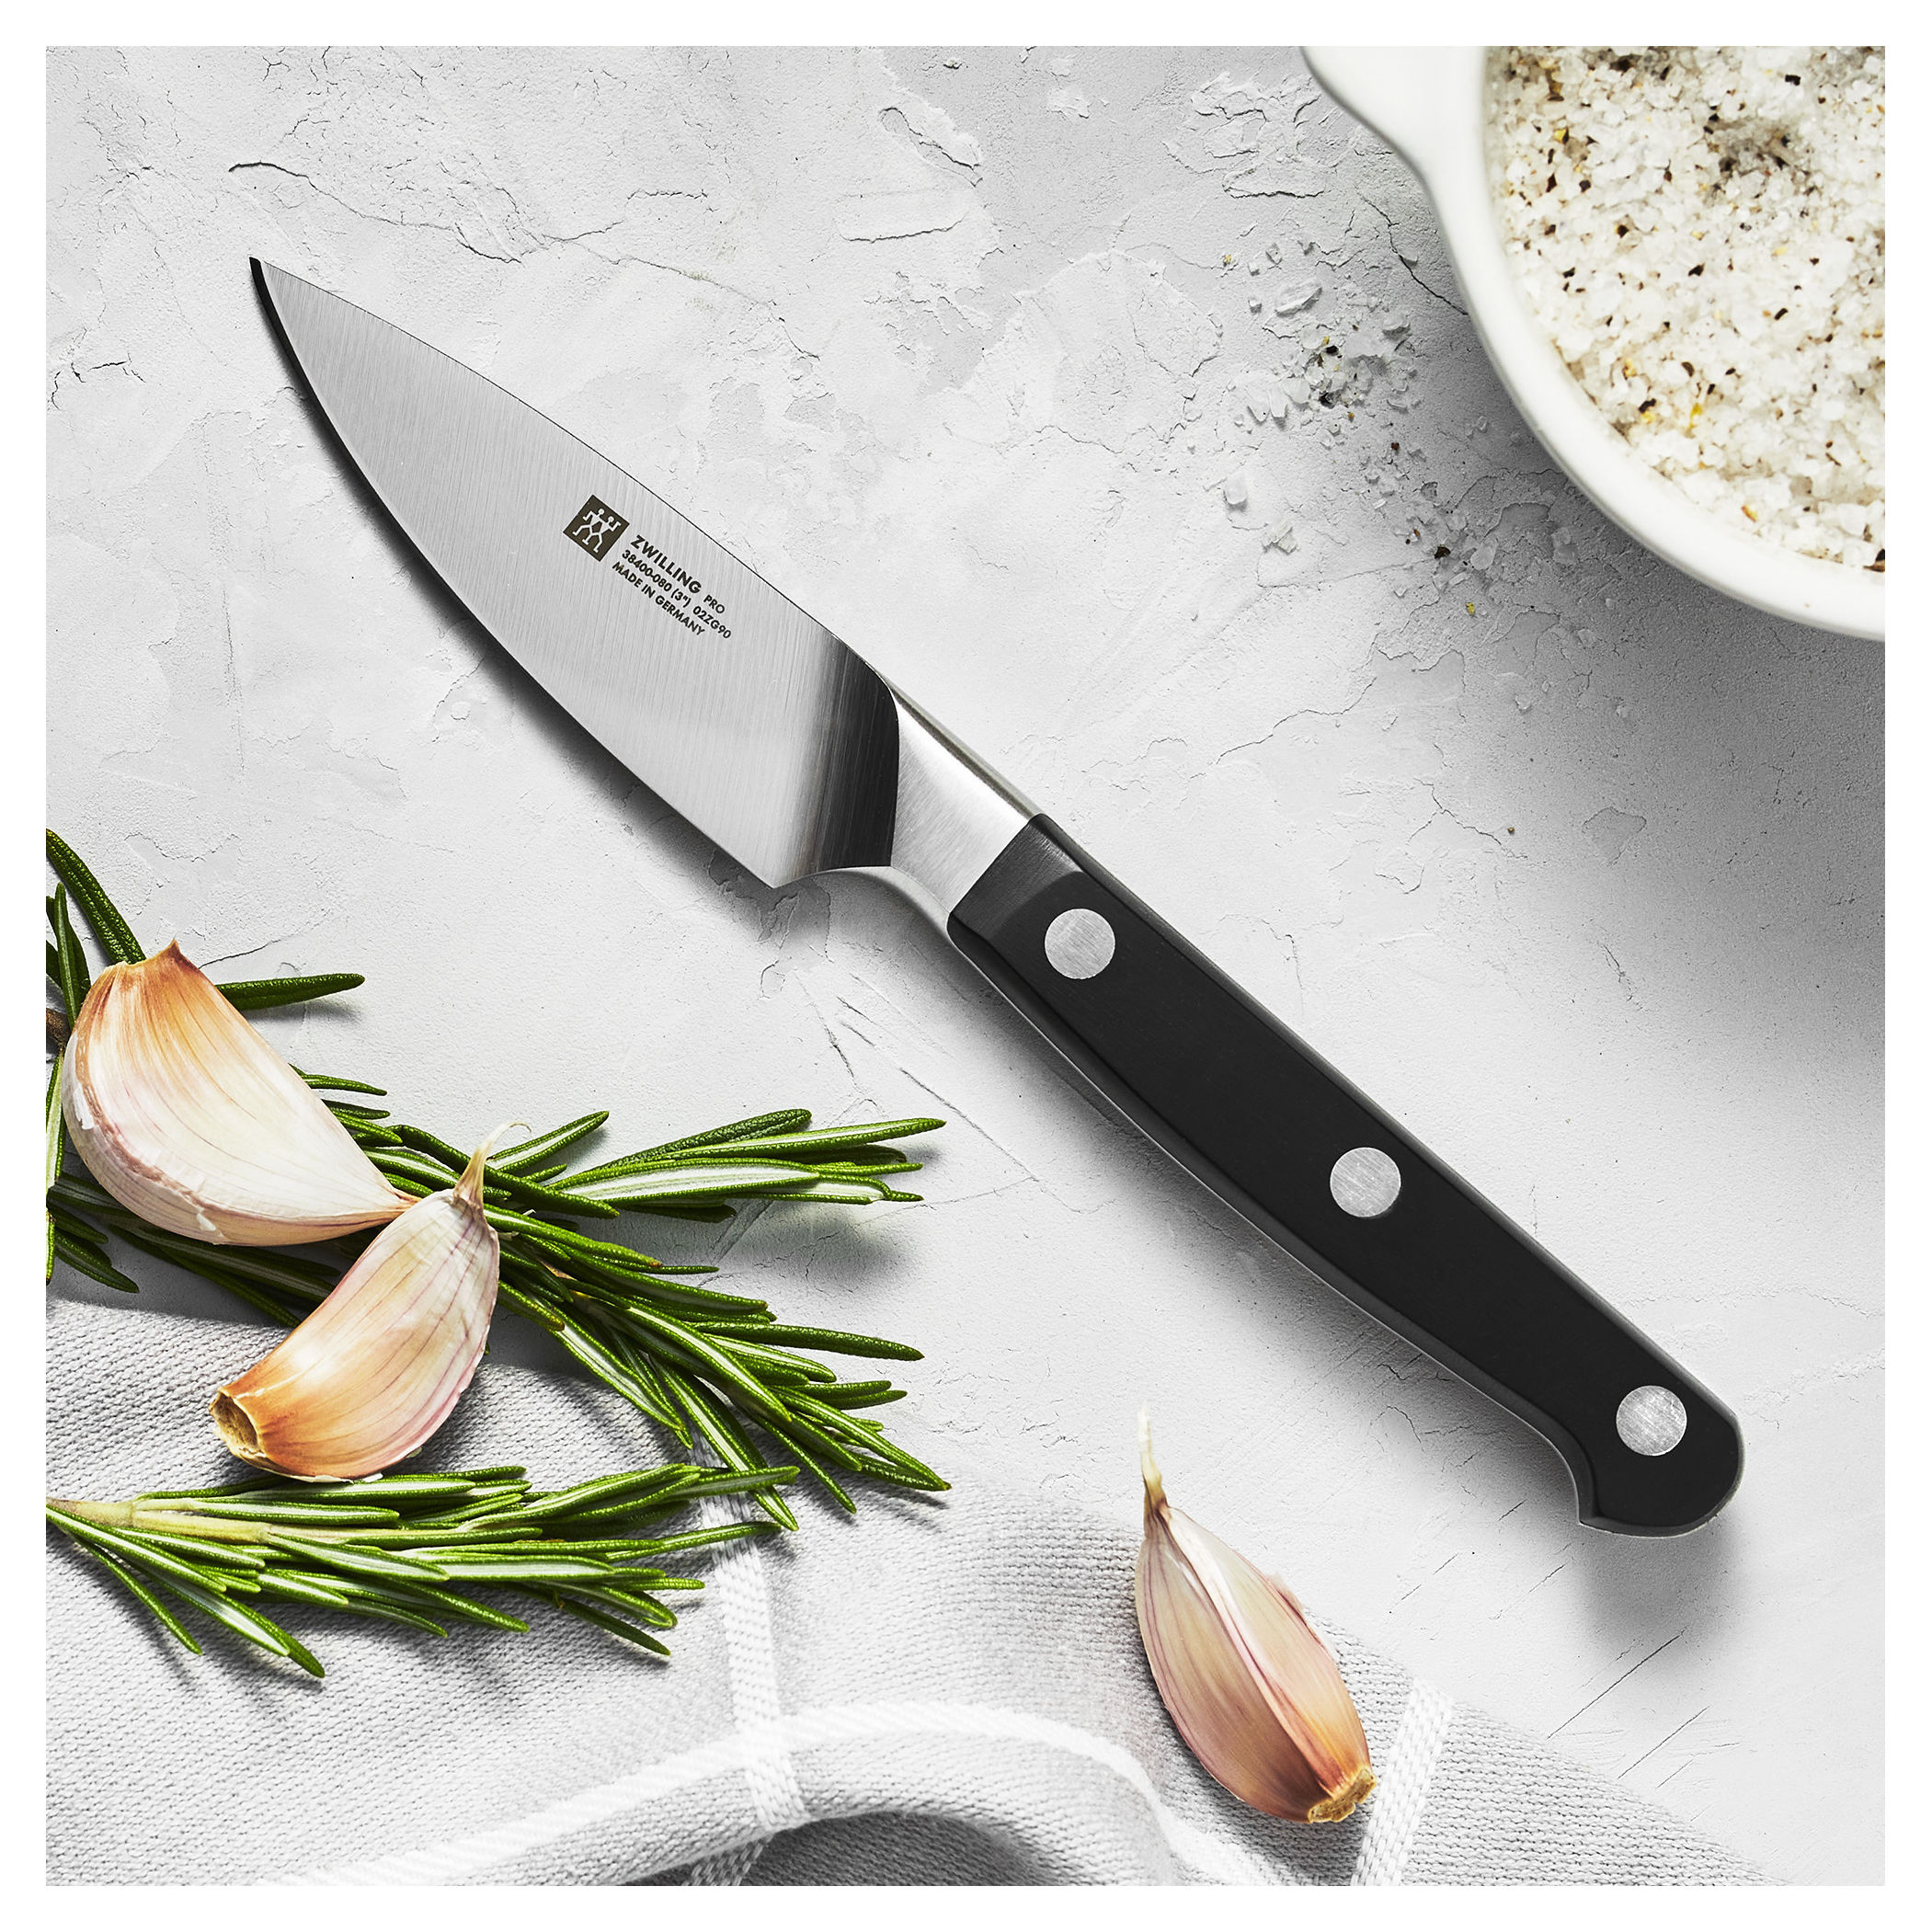 Zwilling Now S 1009647 paring knife, 10 cm  Advantageously shopping at